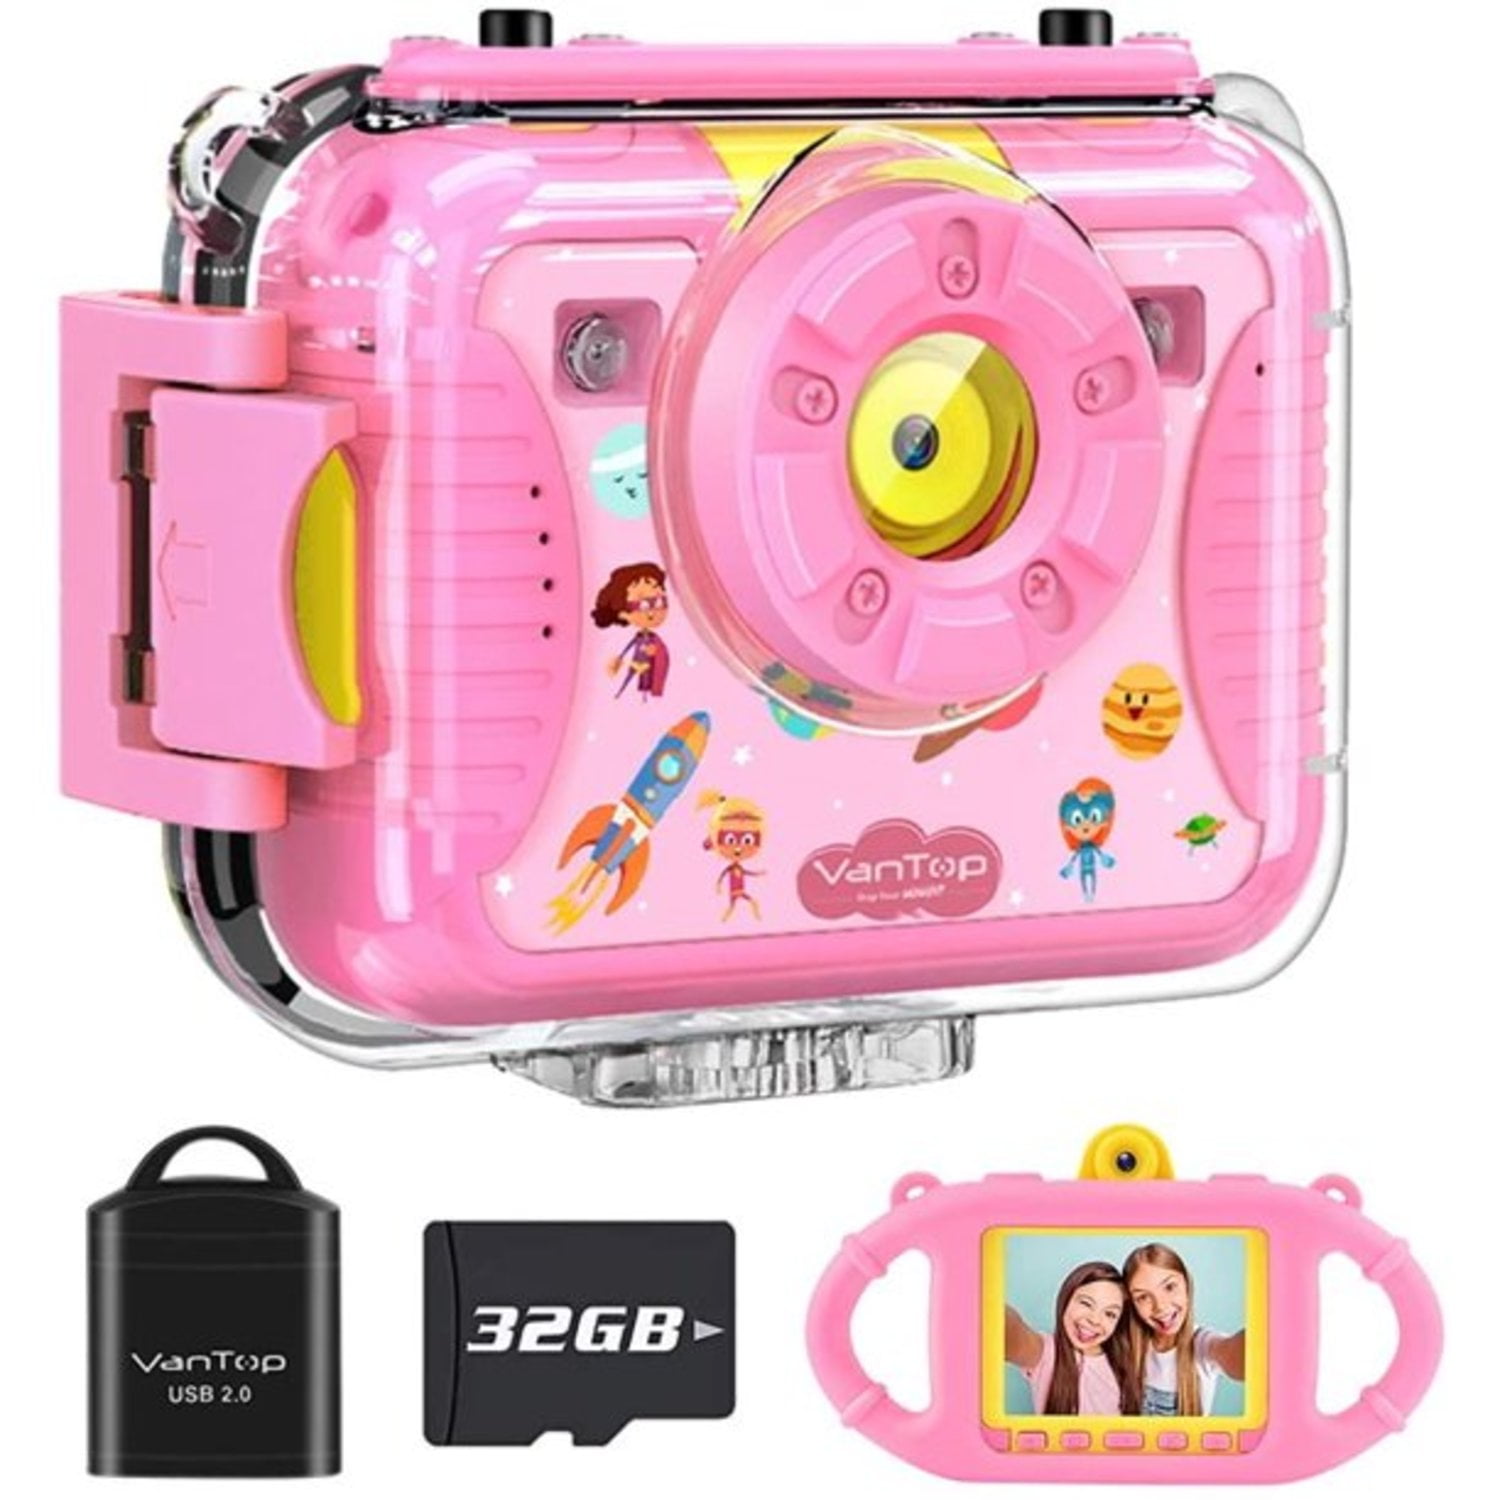 Oiiwak Children Kids Camera 5.0 MP Digital Waterproof Camera with Video Recorder for Girls Birthday Gift Learn Camera Includes 32GB Memory Card Yellow